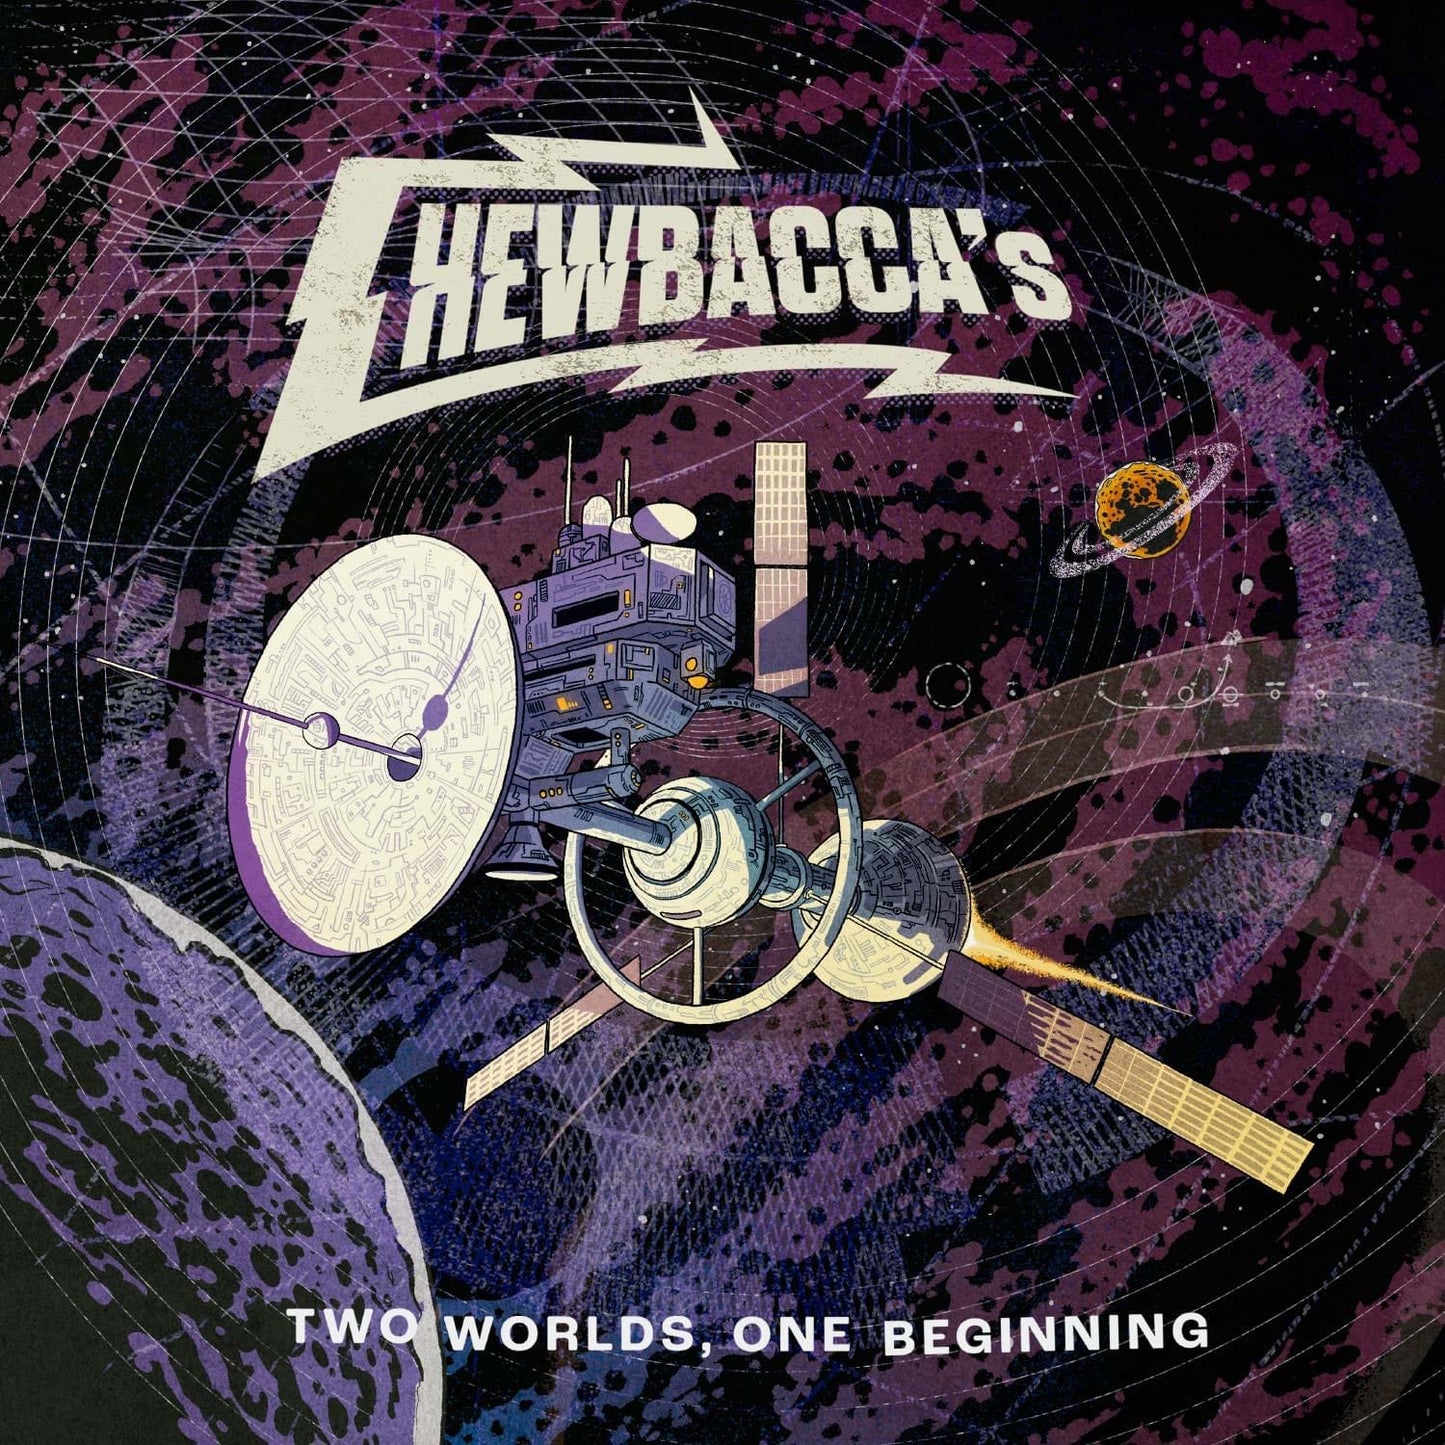 OMR-095 CHEWBACCAS “Two Worlds, One Beginning” CD EP